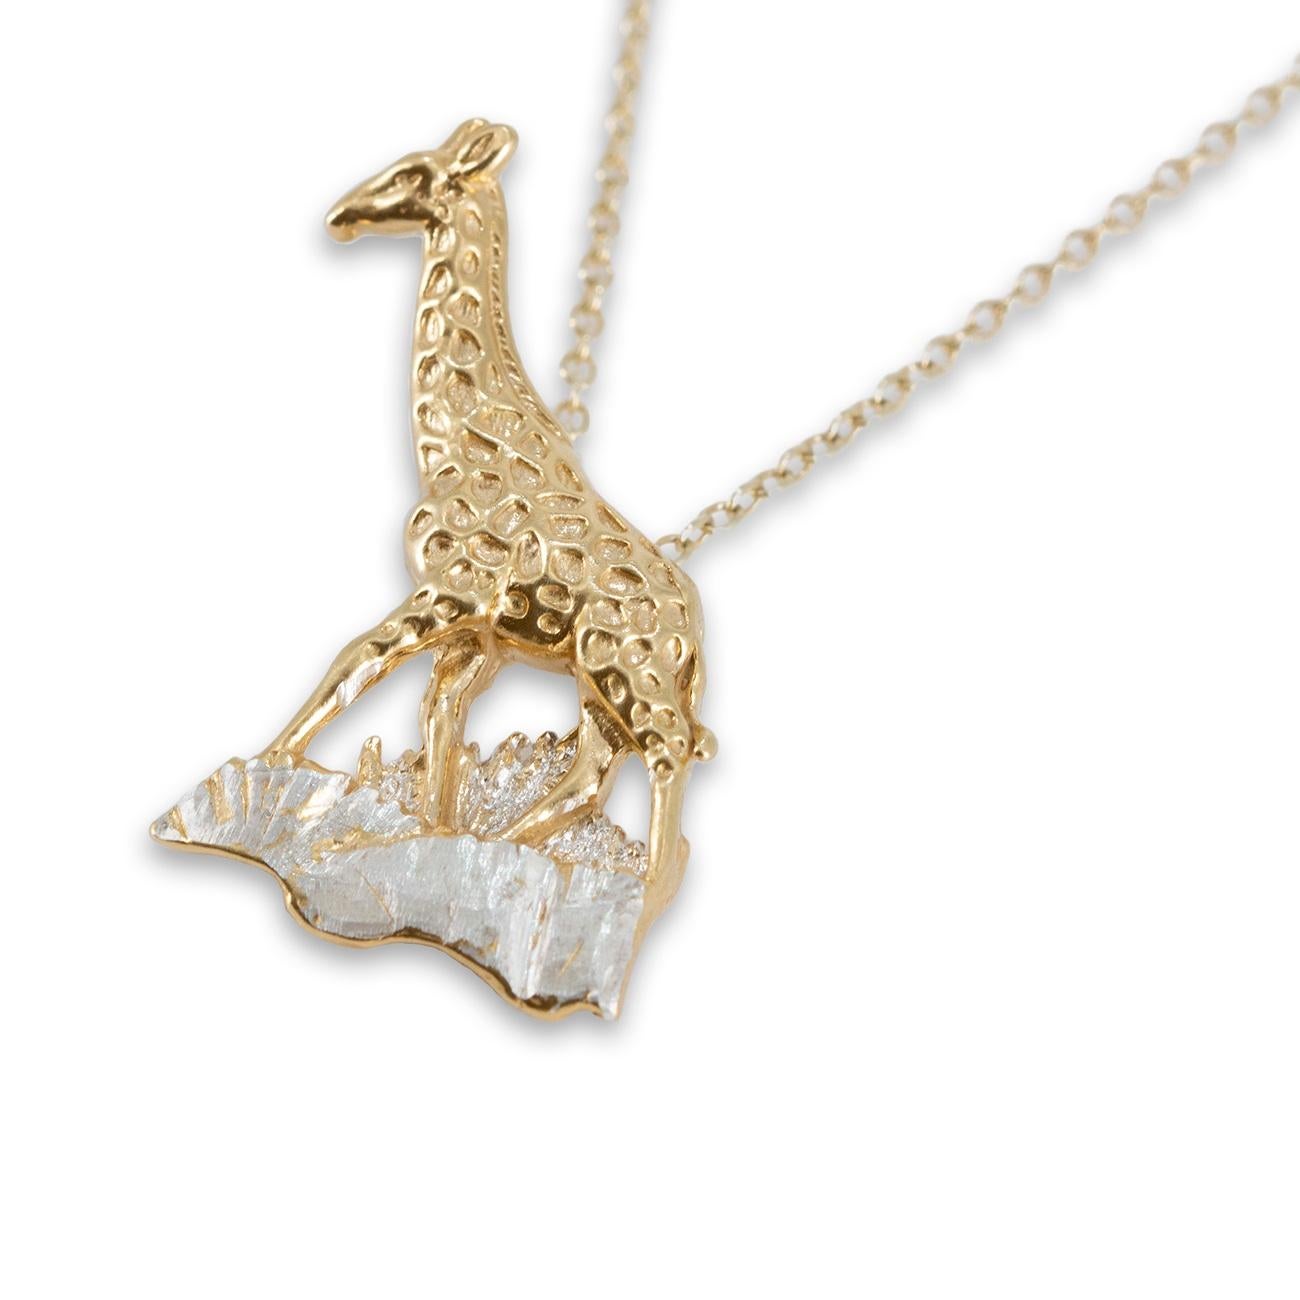 Solid Silver Giraffe Pendant with 18 Karat Gold Vermeil In New Condition For Sale In London, GB